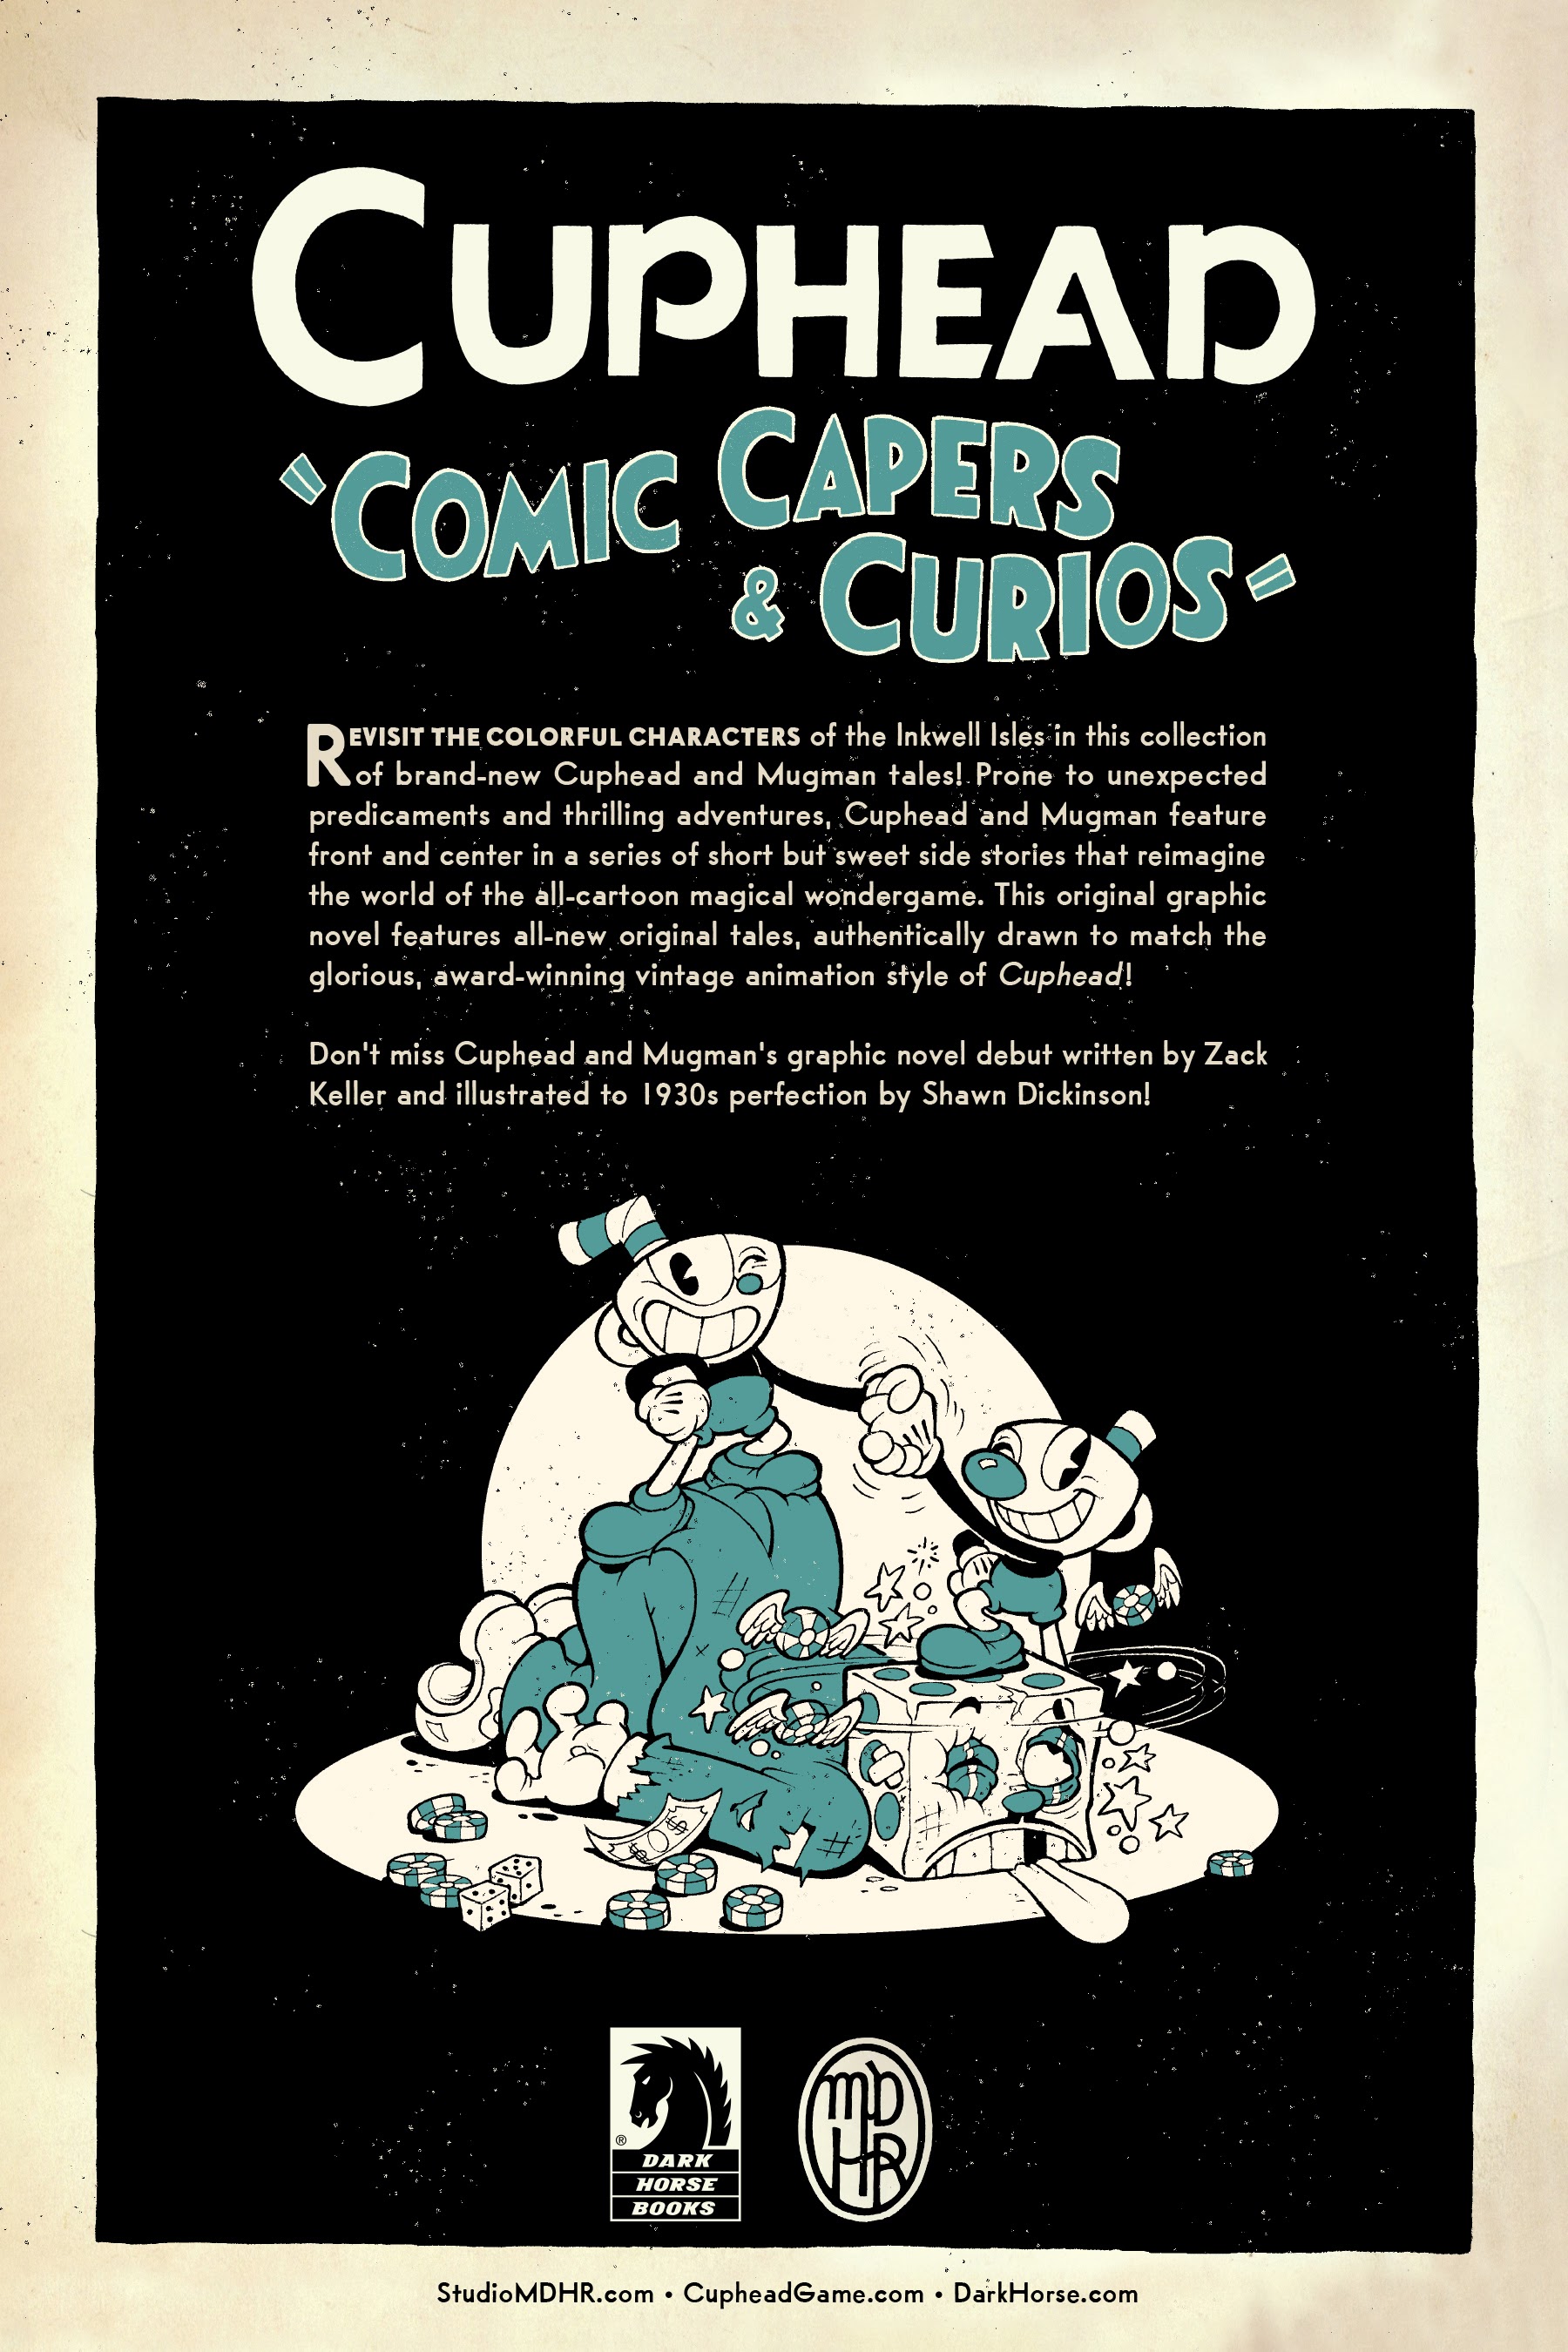 Read online Cuphead: Comic Capers & Curios comic -  Issue # TPB - 73